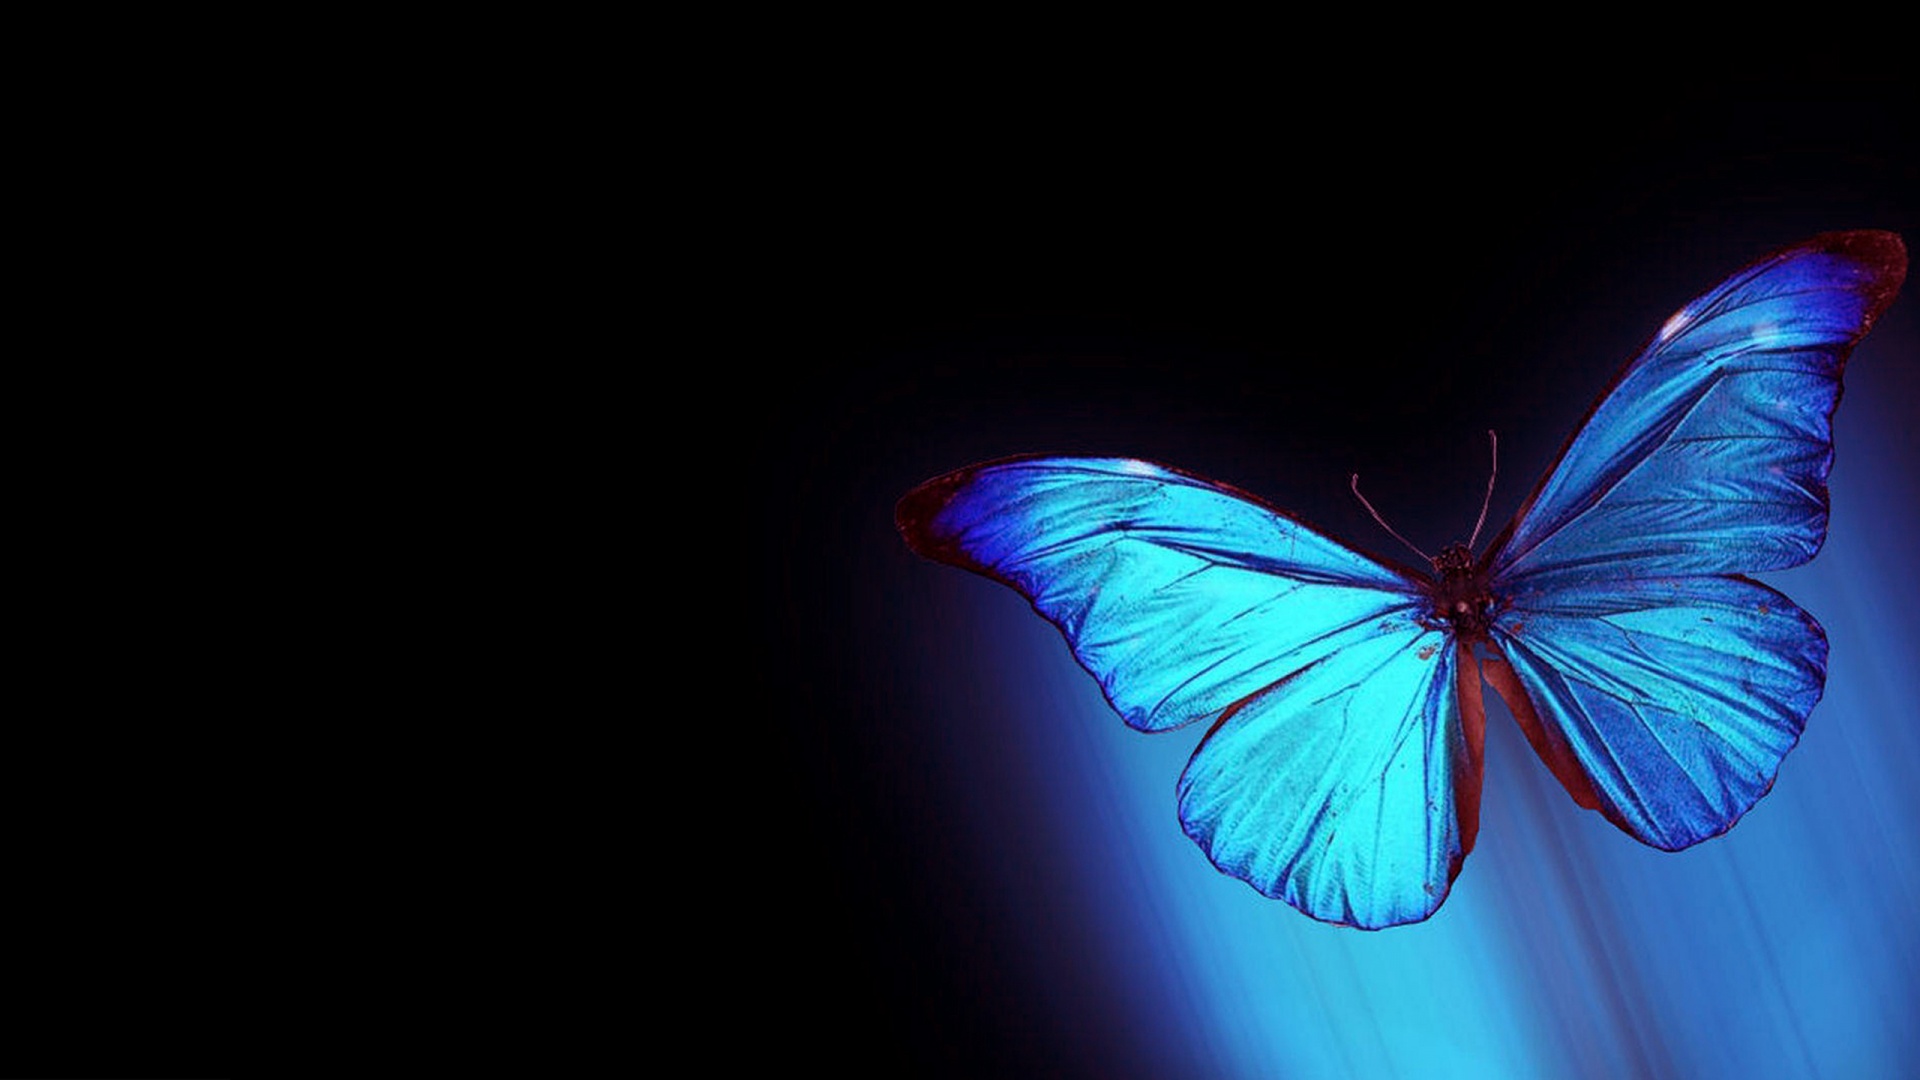 Abstract Butterfly Wallpapers For Laptop Unique HD Wallpapers